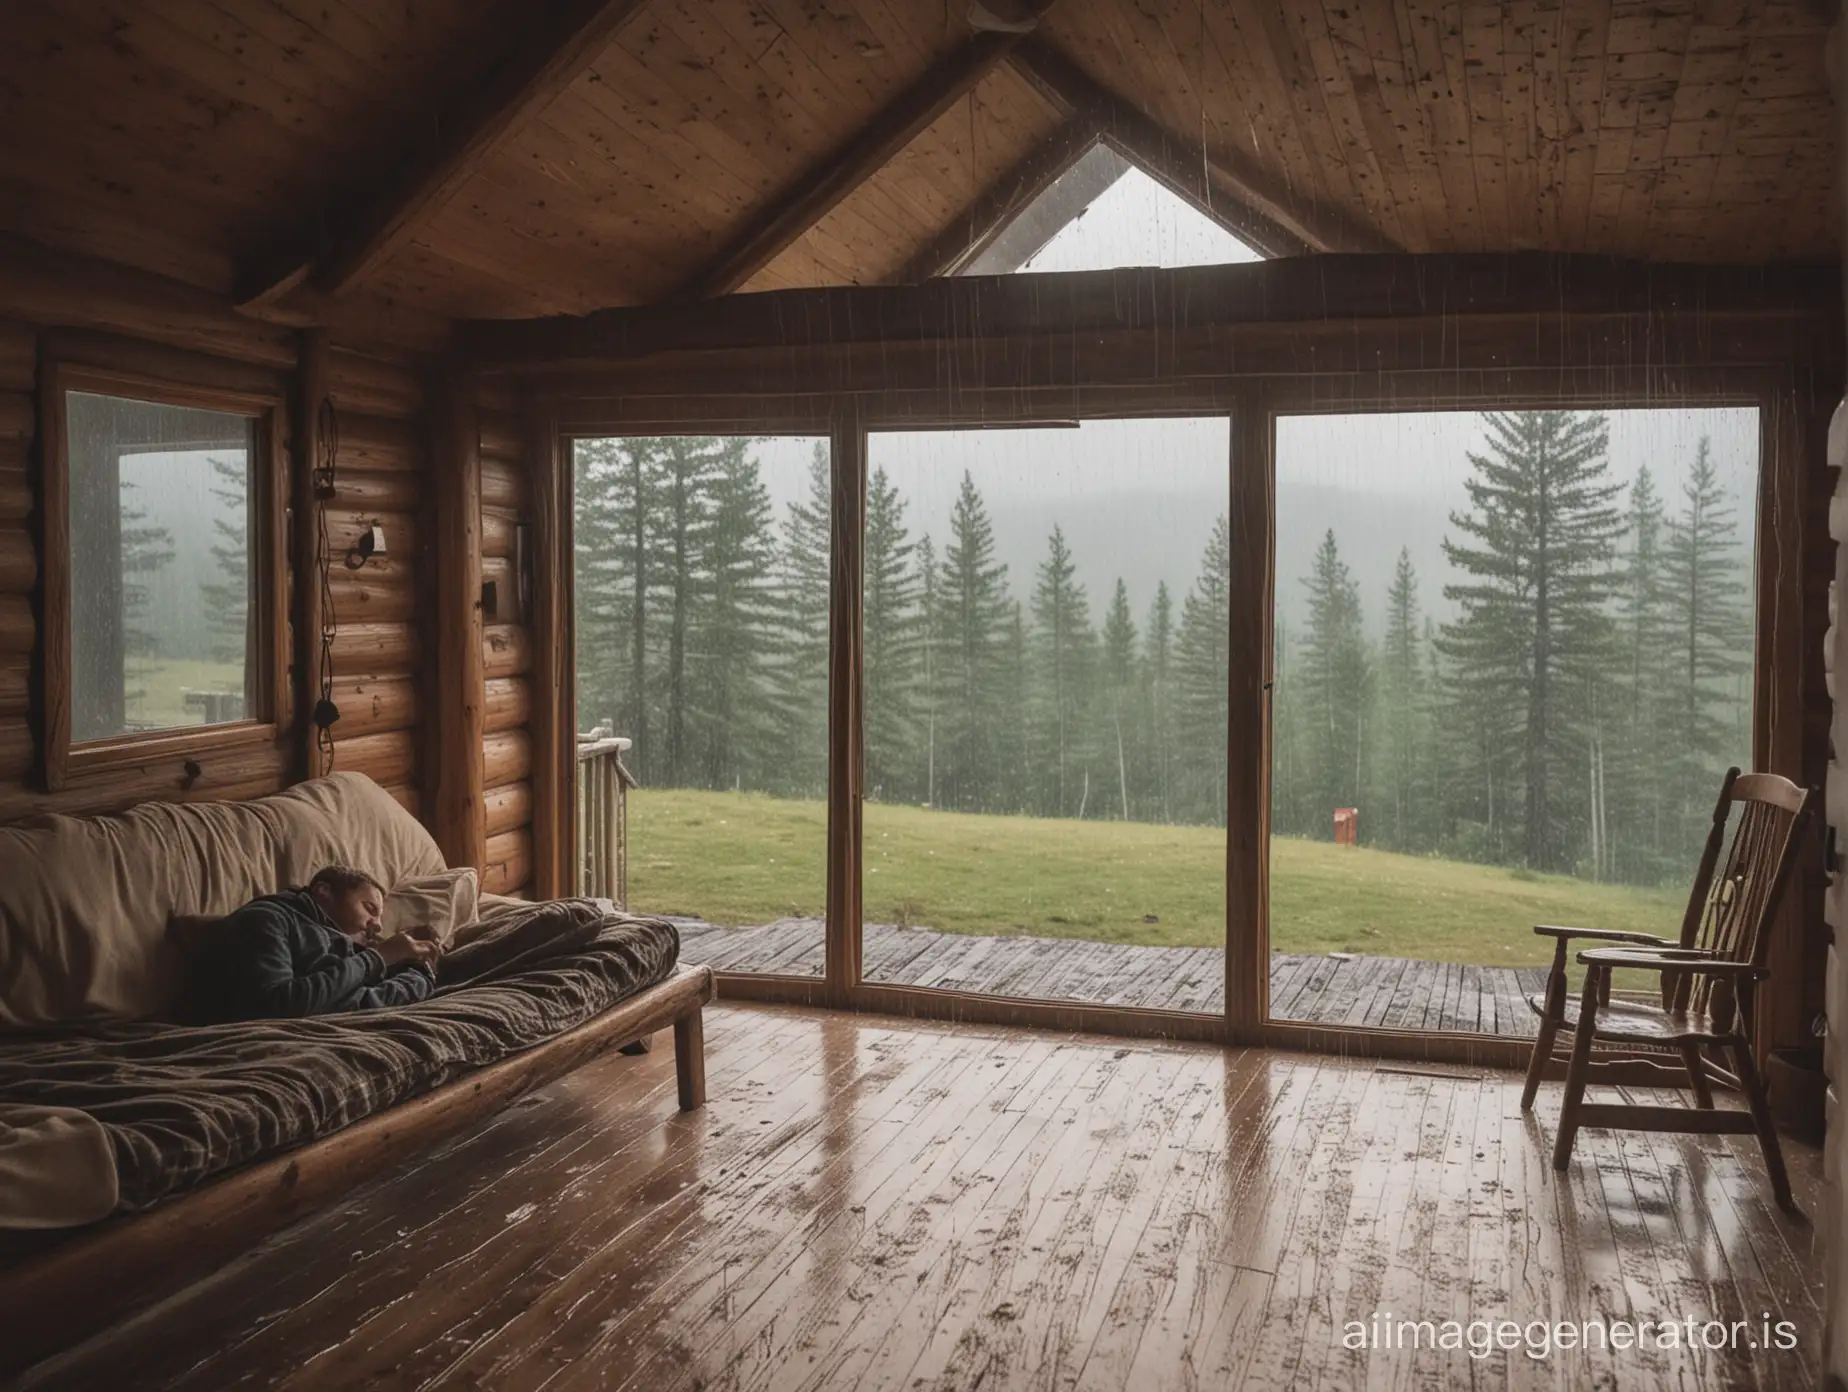 Cozy-Cabin-Rainy-Day-Scene-Relaxing-Indoors-While-It-Rains-Outside